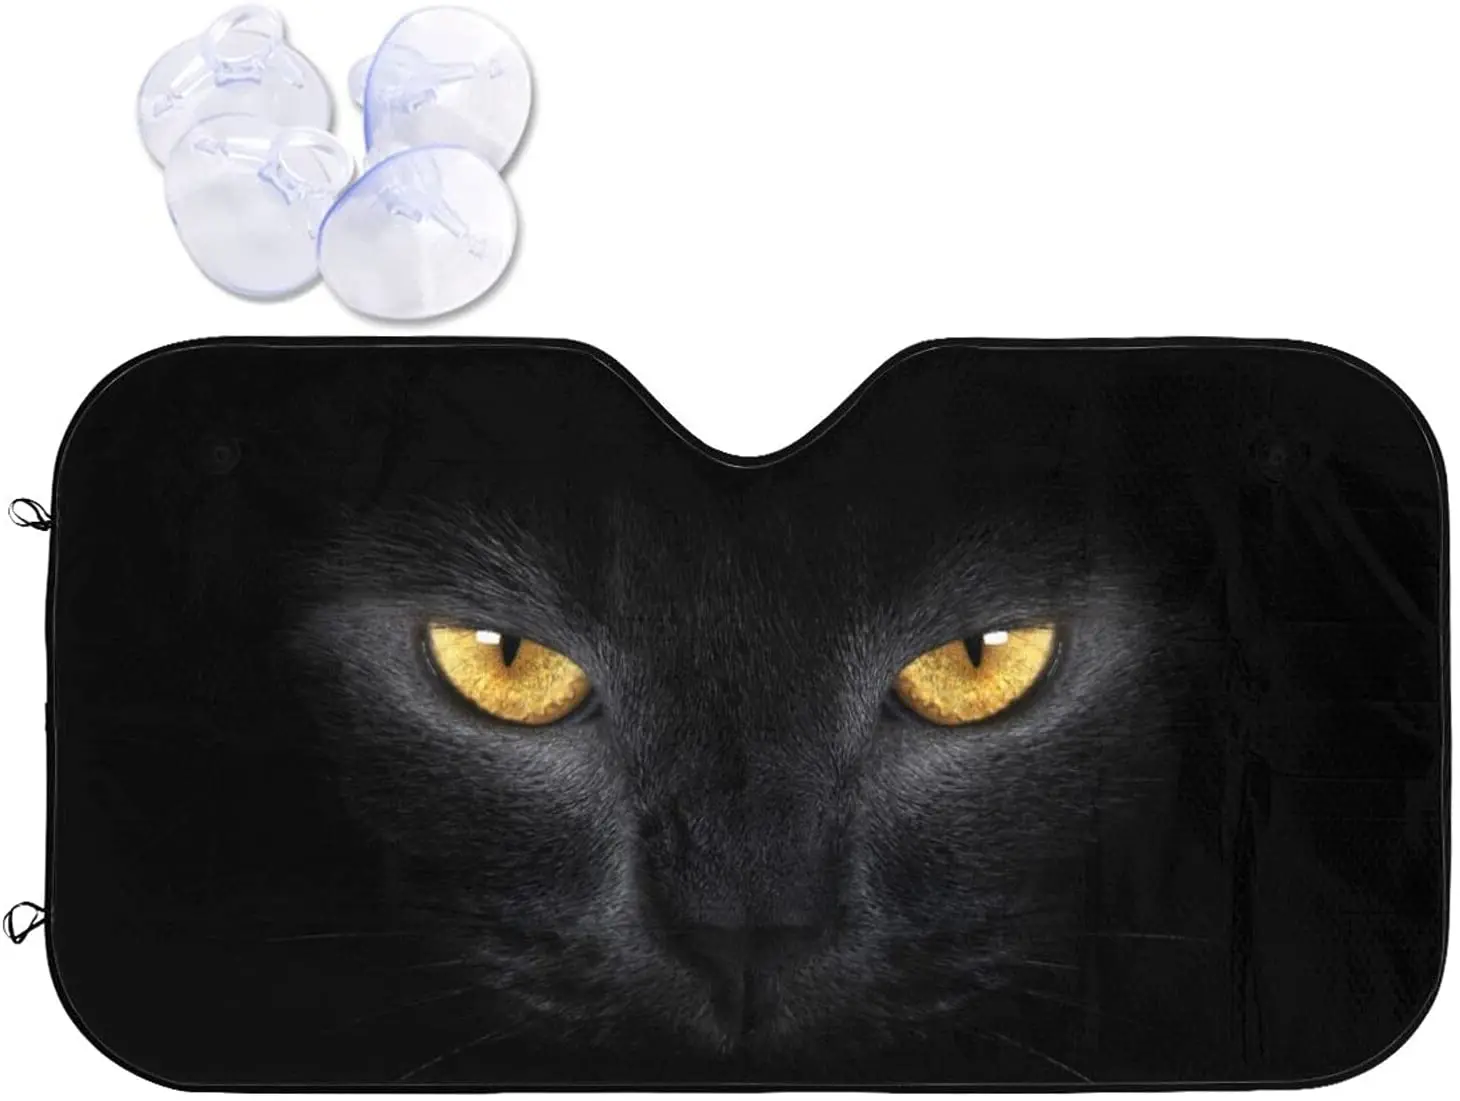 

Cat Face with Yellow Eyes Car Sun Shade for Windshield Foldable Blocks Uv Rays Keeps Your Vehicle Cool Protect The Interior of